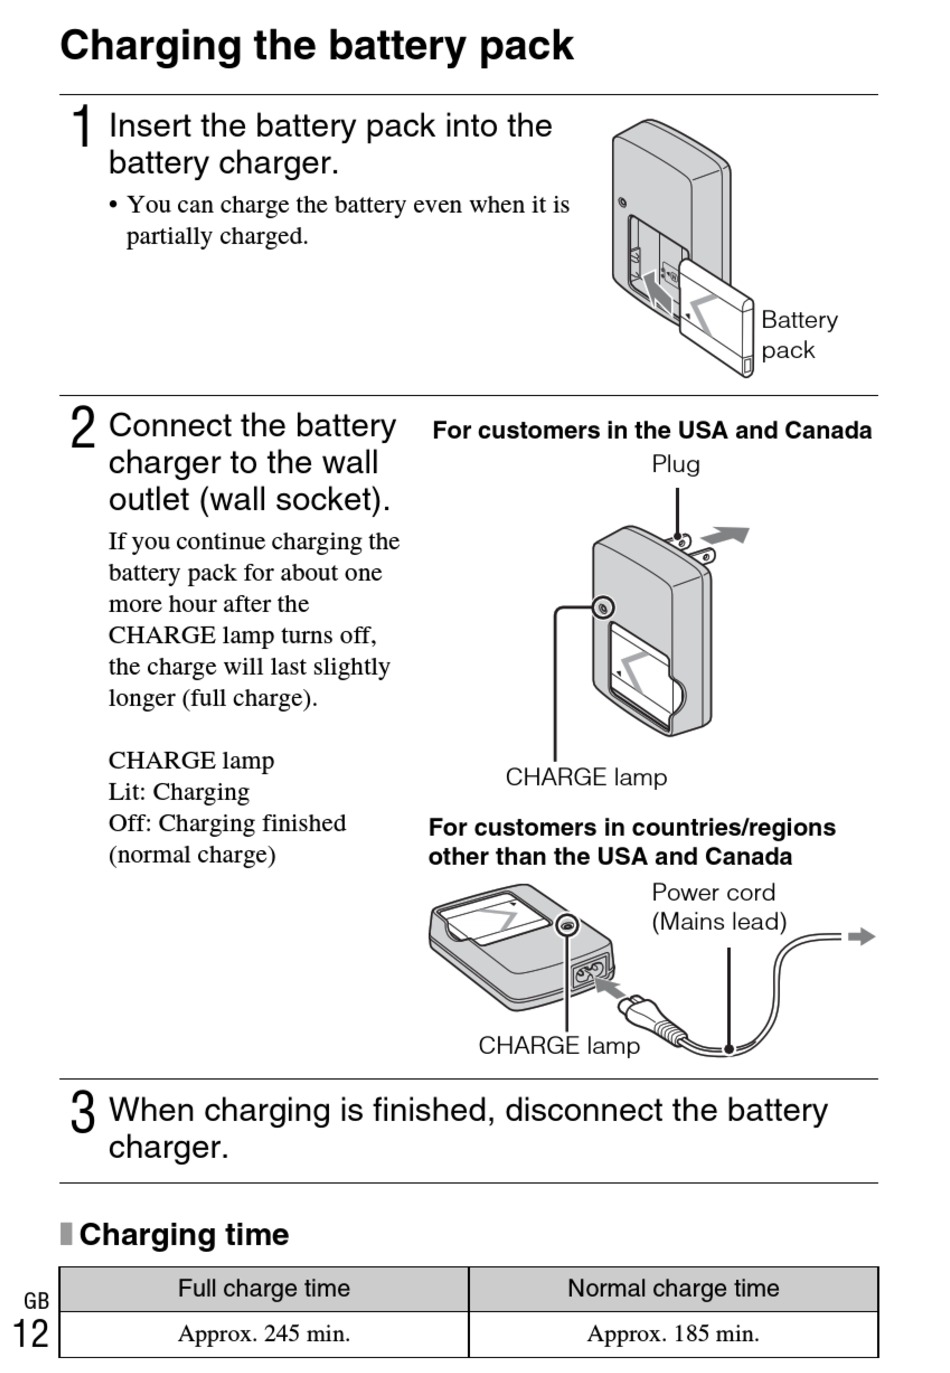 Charging The Battery Pack - Sony Cyber-shot DSC-W320 Instruction Manual  [Page 12] | ManualsLib